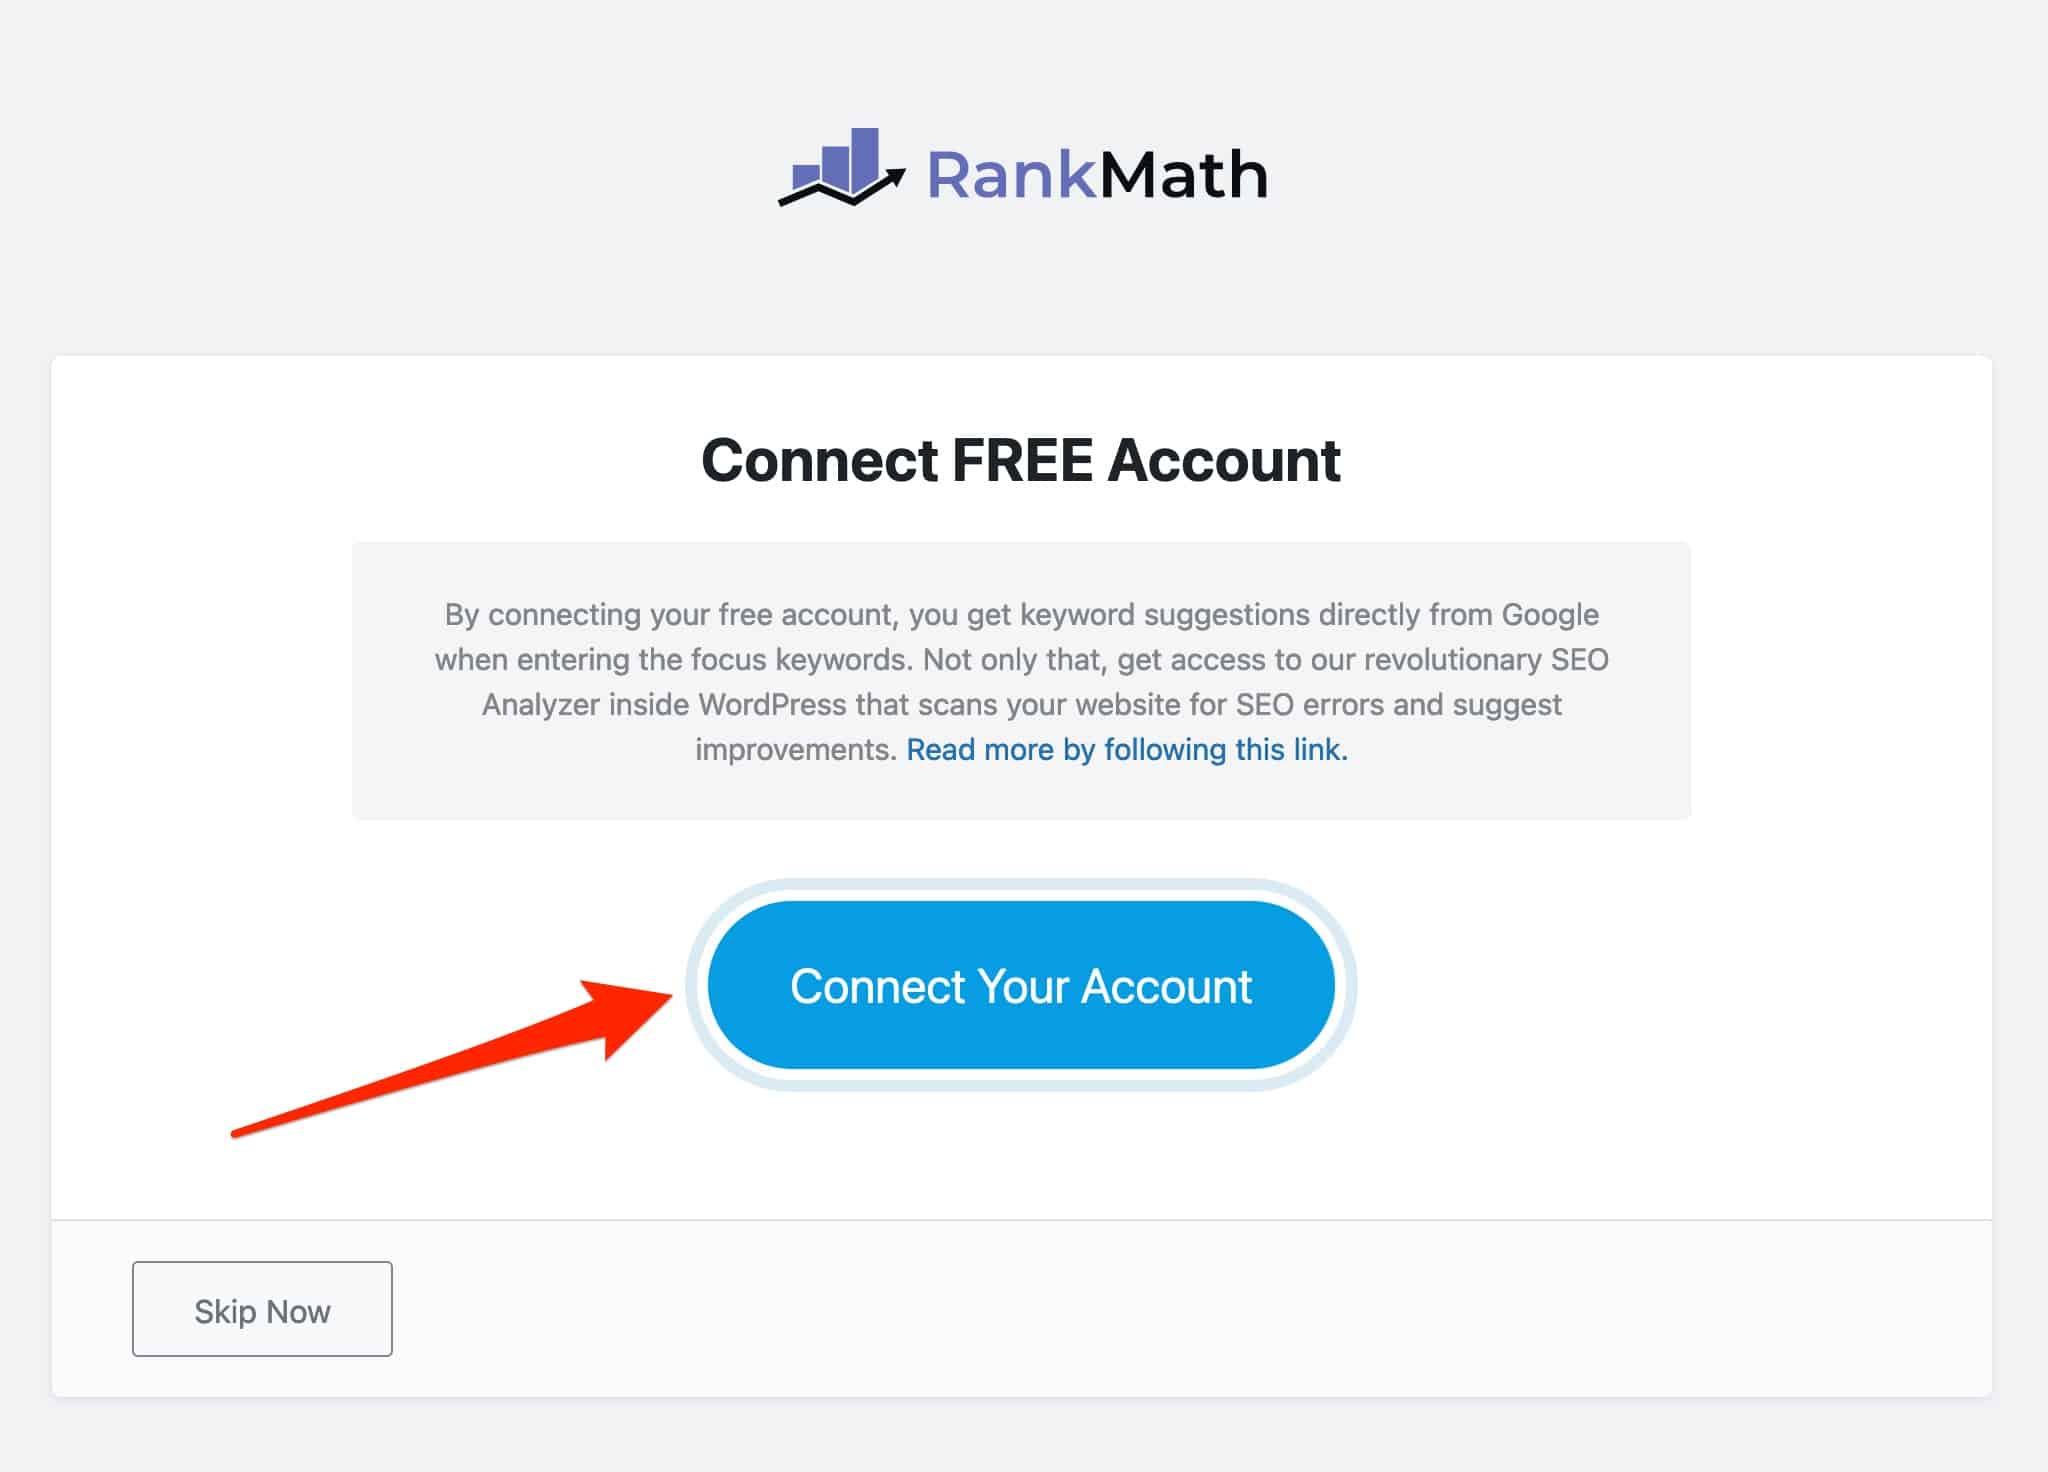 Connecting to your Rank Math account.